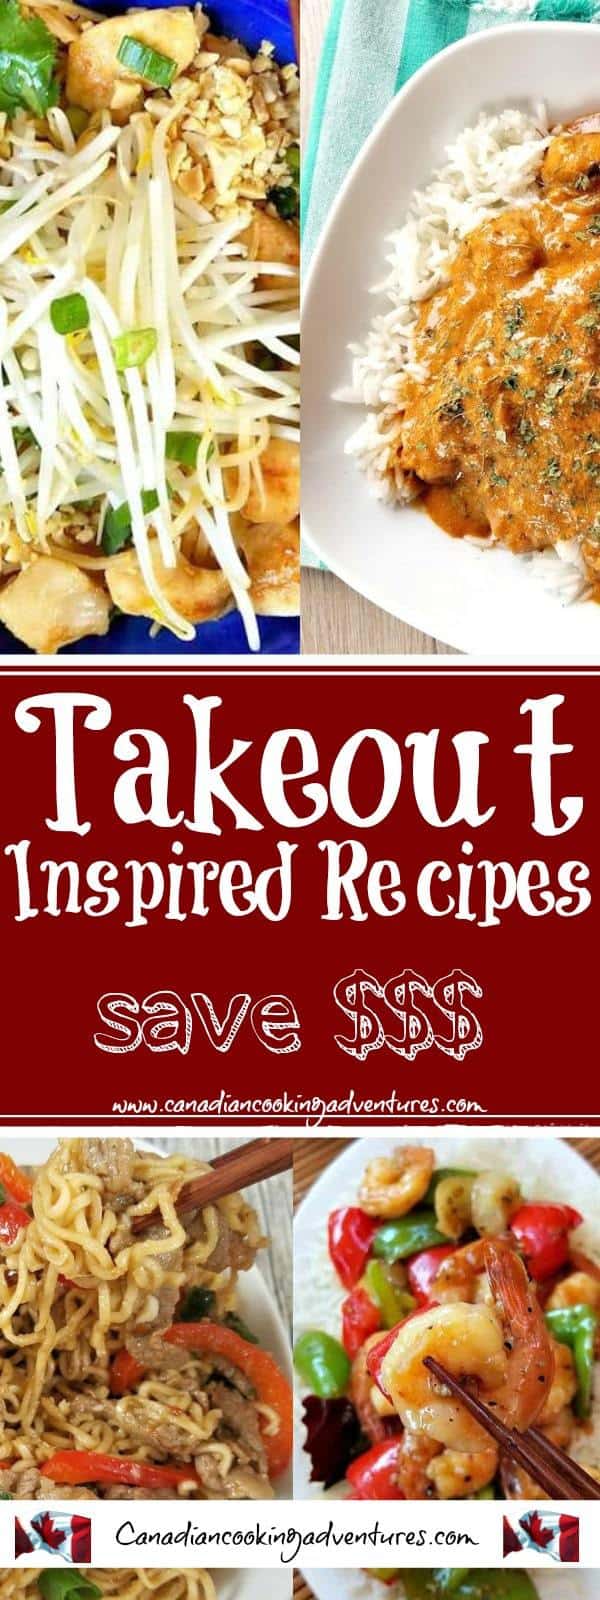 Skip the Takeout Recipes